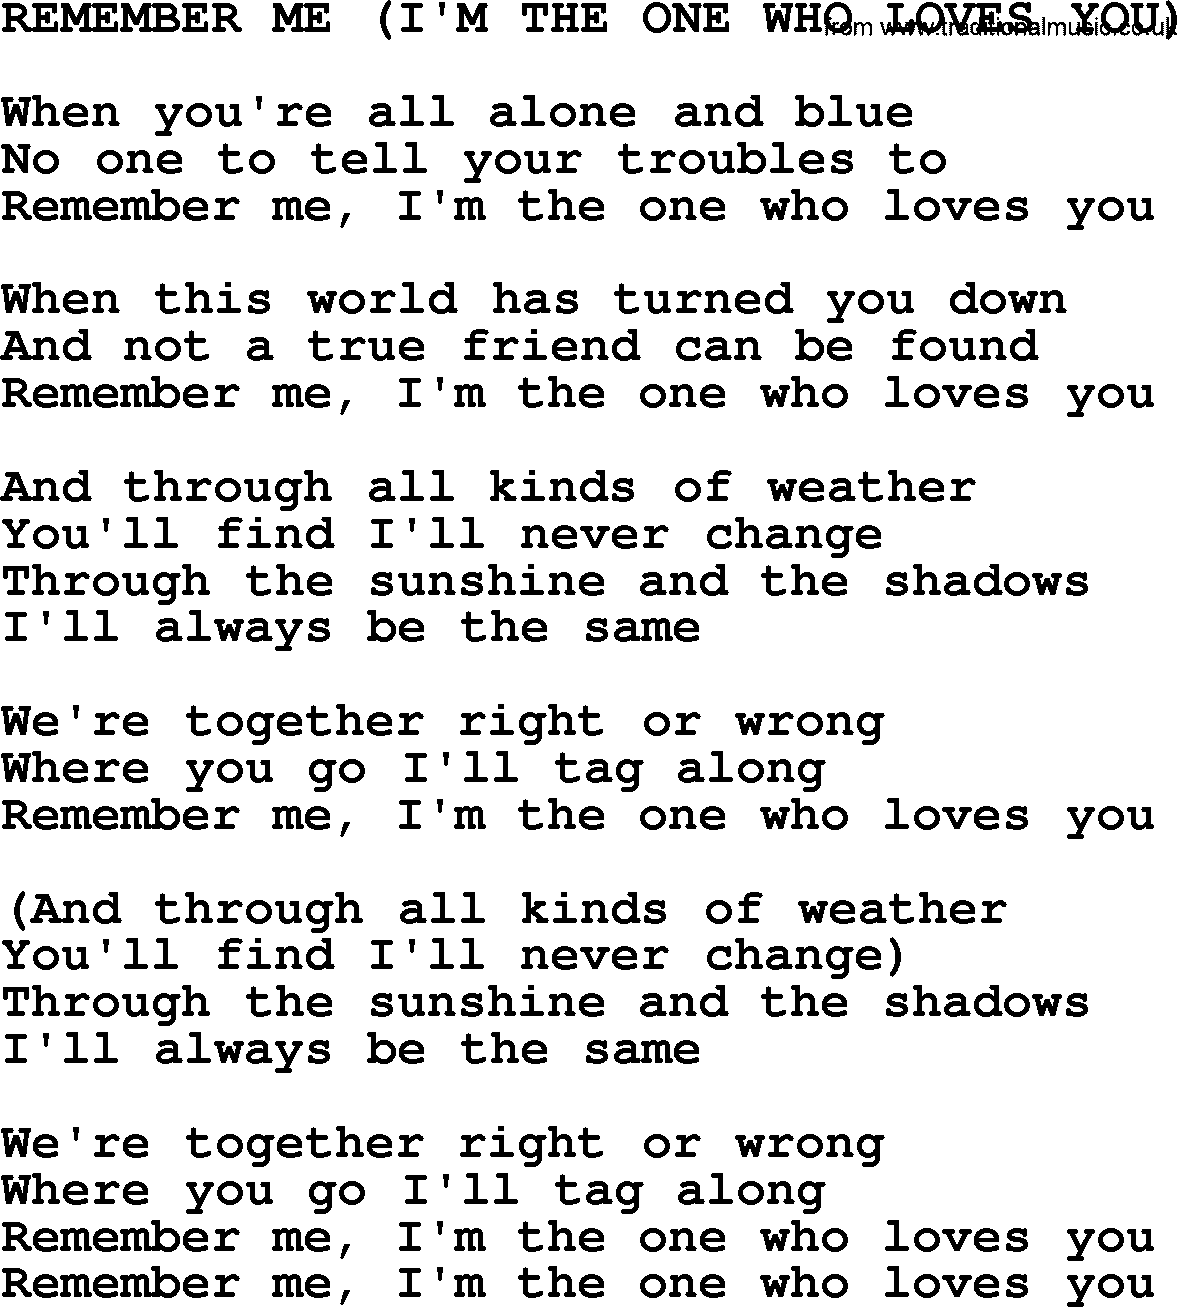 Johnny Cash song Remember Me(I'm The One Who Loves You).txt lyrics